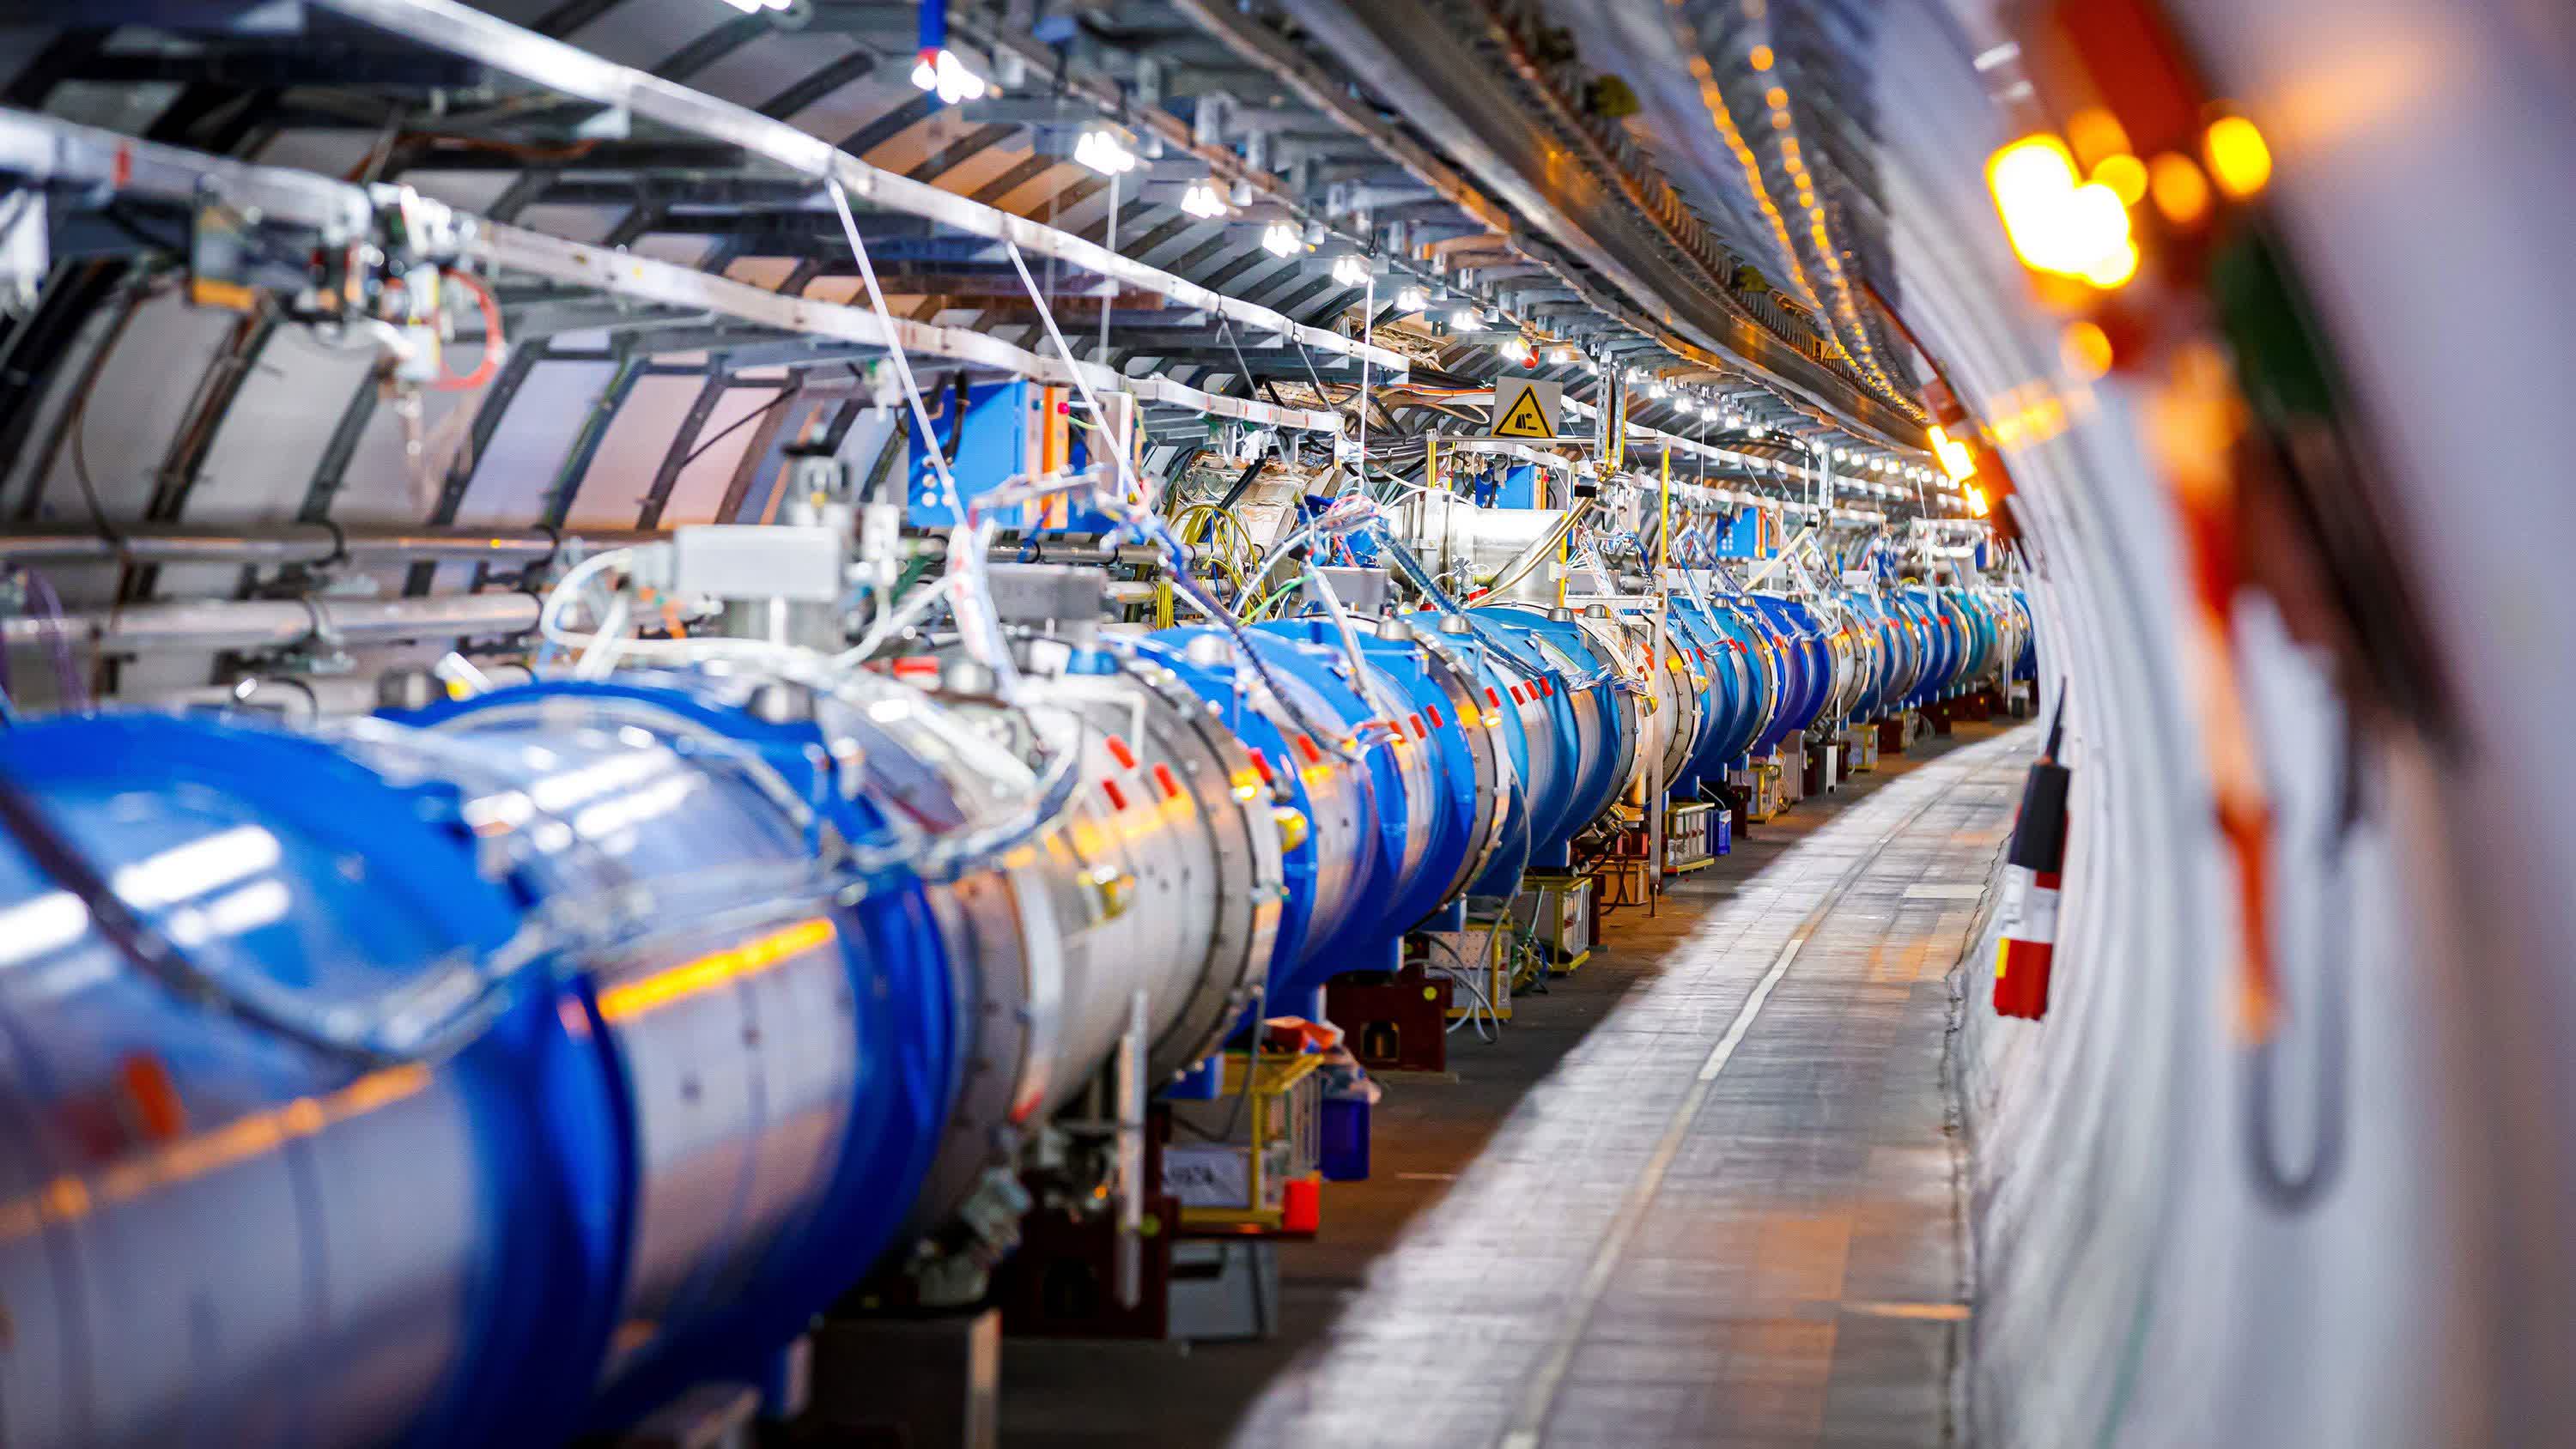 Large Hadron Collider needed a new database system to sustain its petabyte-hungry experiments